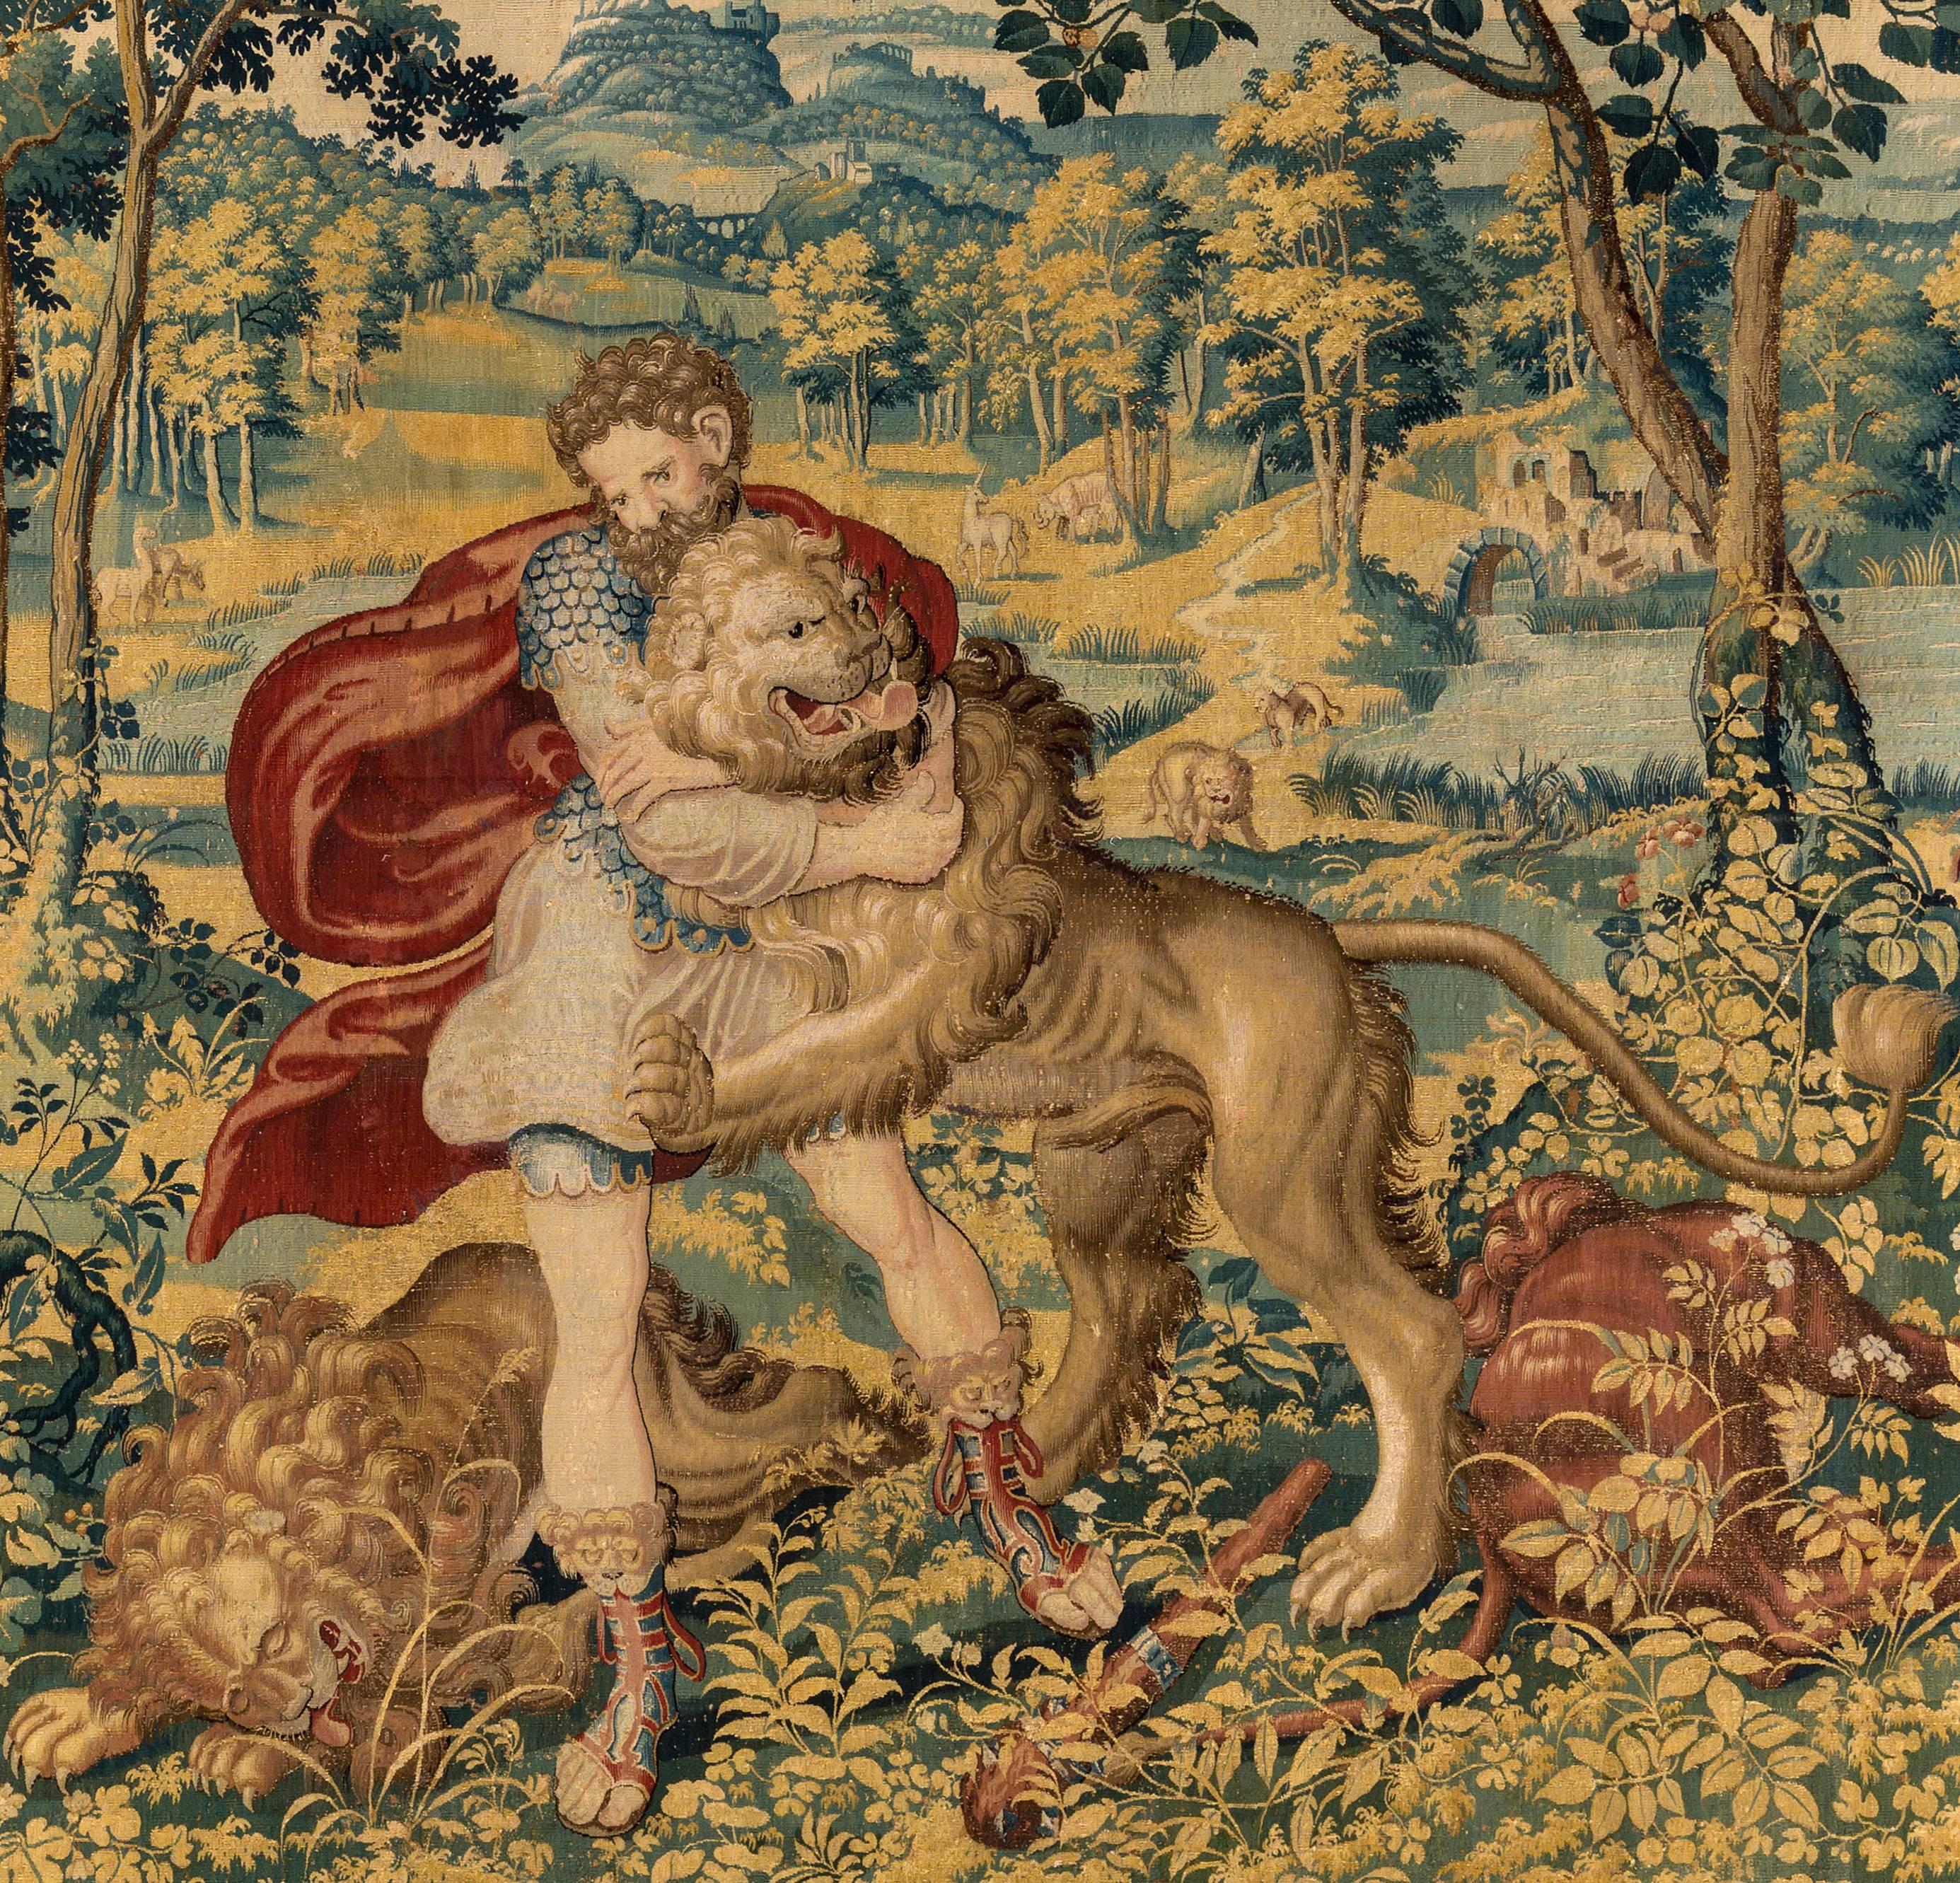 Hercules and the Nemean Lion
Flanders - Brussels
16th century

This tapestry depicts the killing of the Nemean Lion, which is the first of the 12 labours ordered to Hercules by Eurystheus, king of Argos. This animal, which skins was so tough